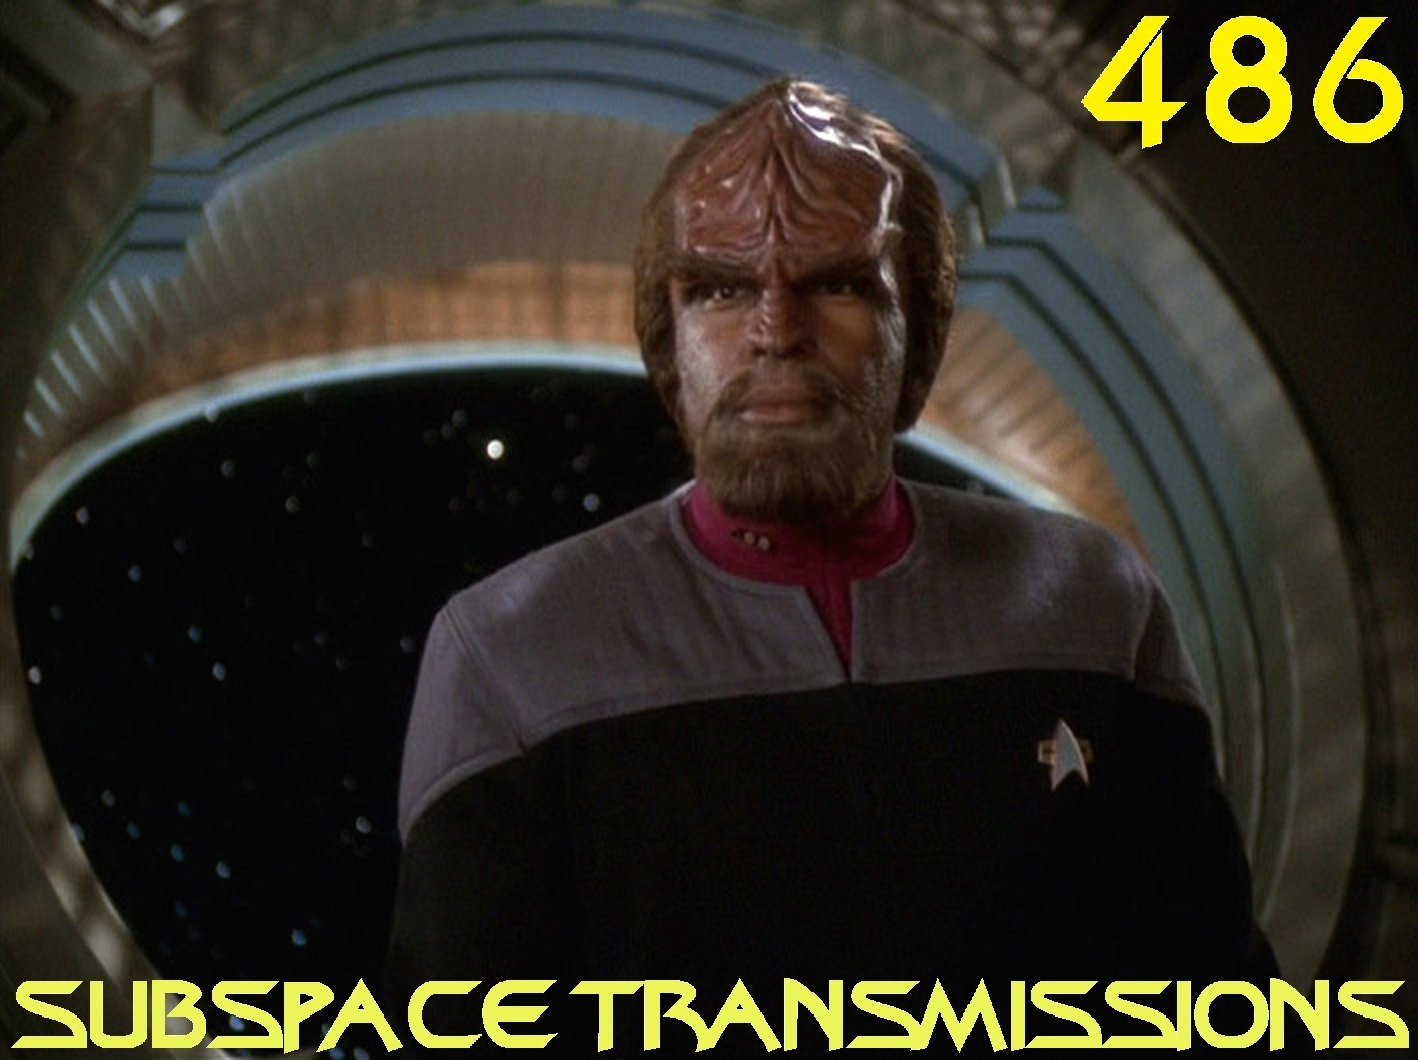 The Journey of Worf (#486)